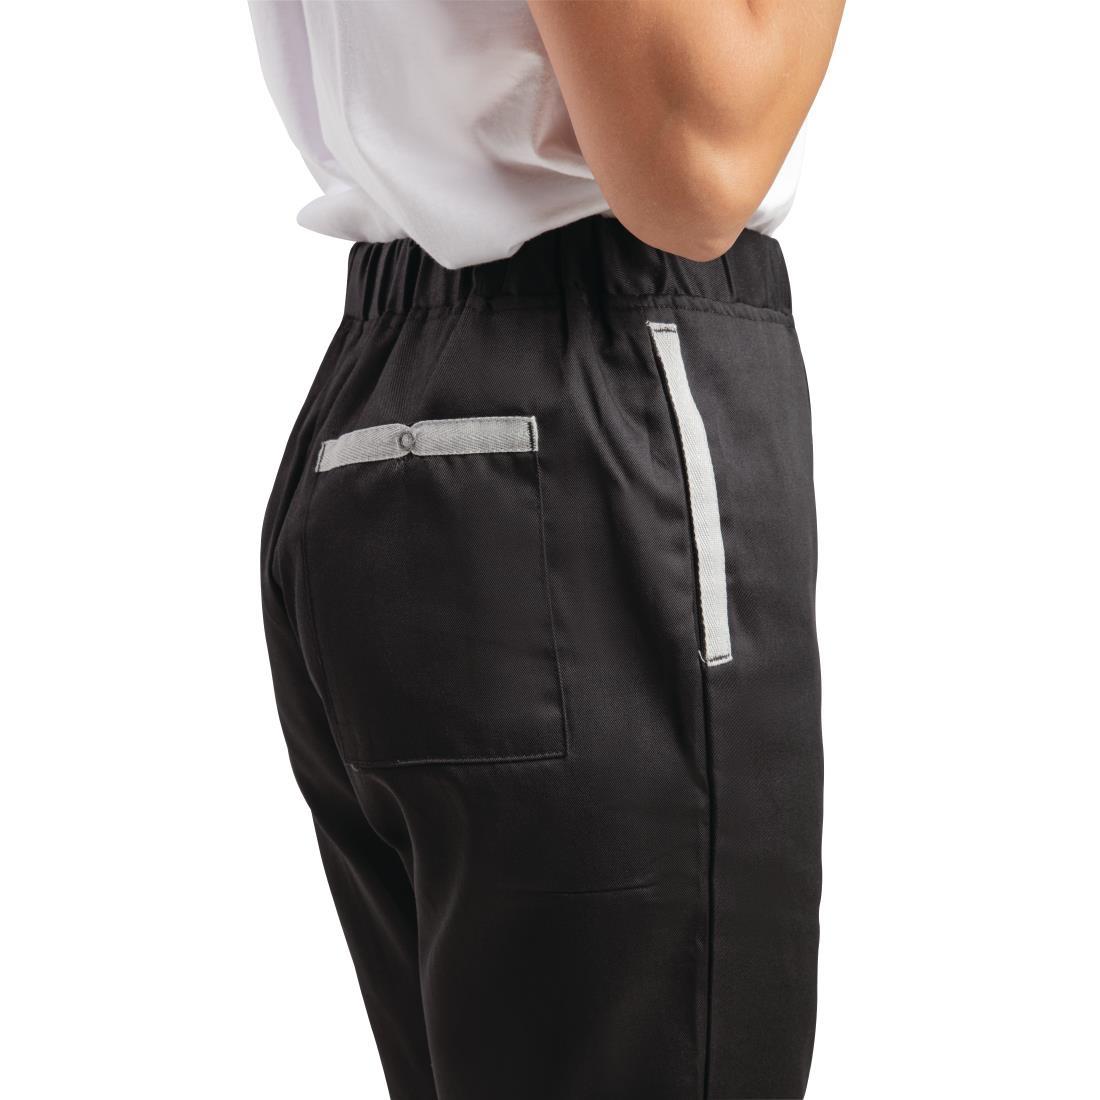 Southside Chefs Utility Trousers Black S - B989-S  - 5